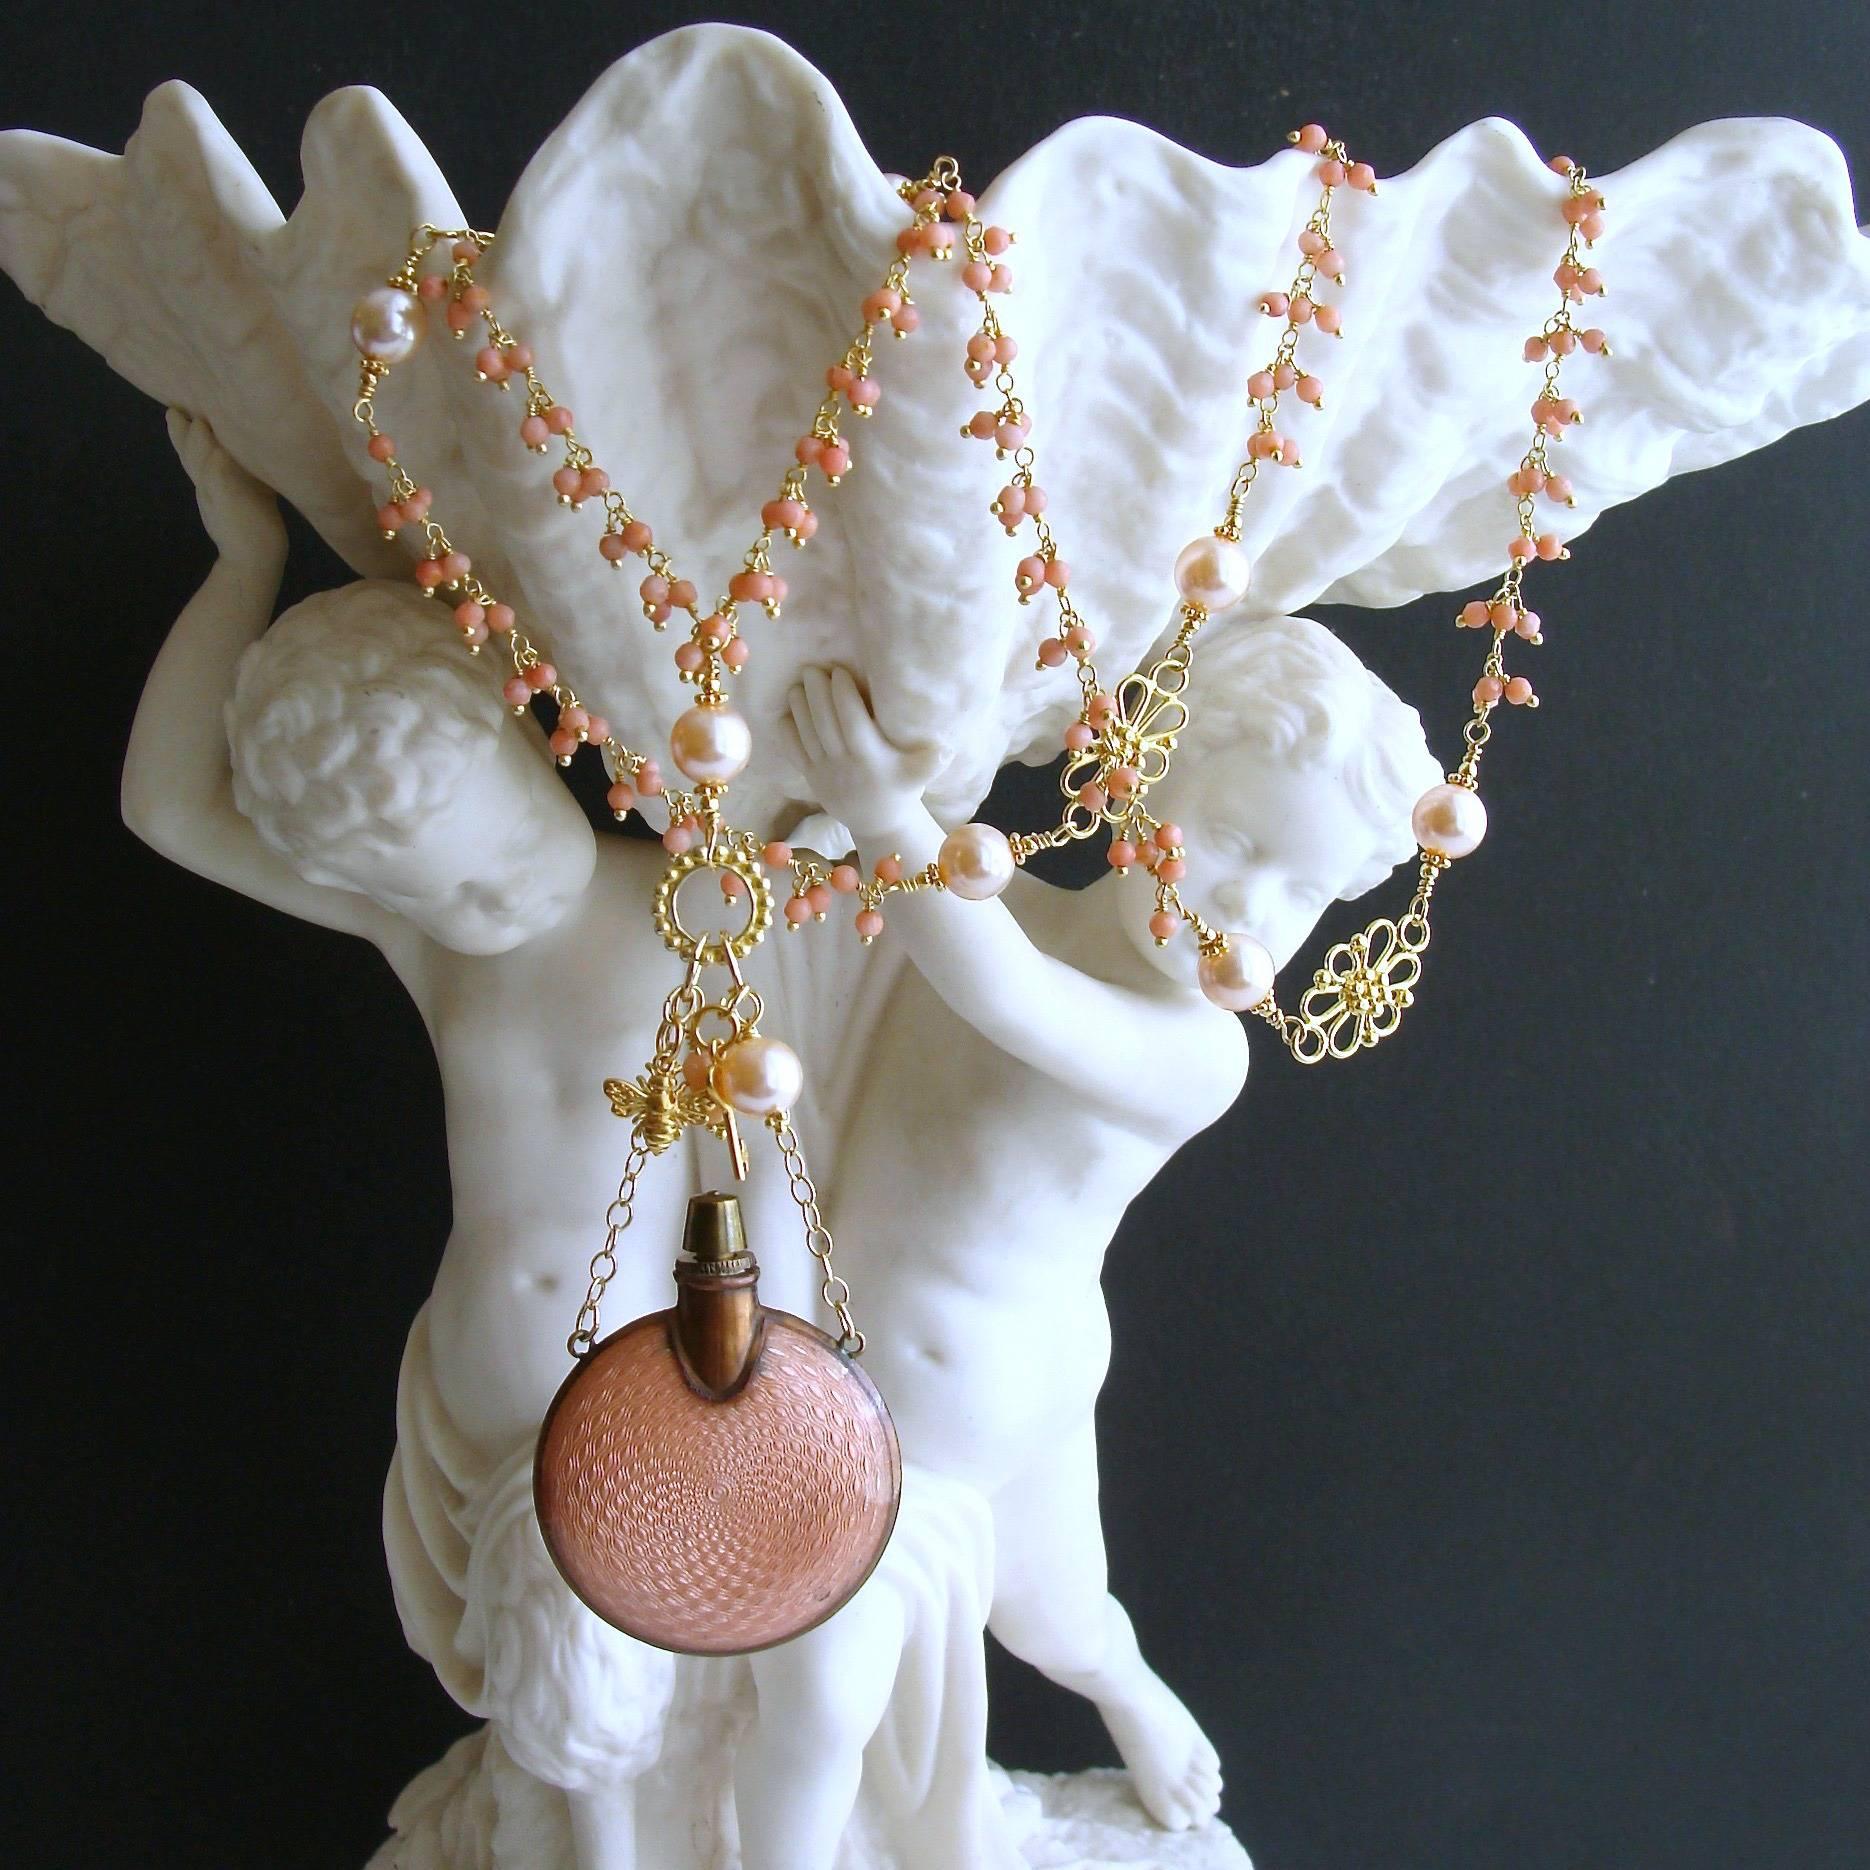 Aline Necklace.

A long and sinewy cluster necklace of coral has been intercepted with delicate gold vermeil filigree connectors, flanked by softly lit peach glass pearls.  This beautifully colored peach sunrise design, culminates with a gorgeous